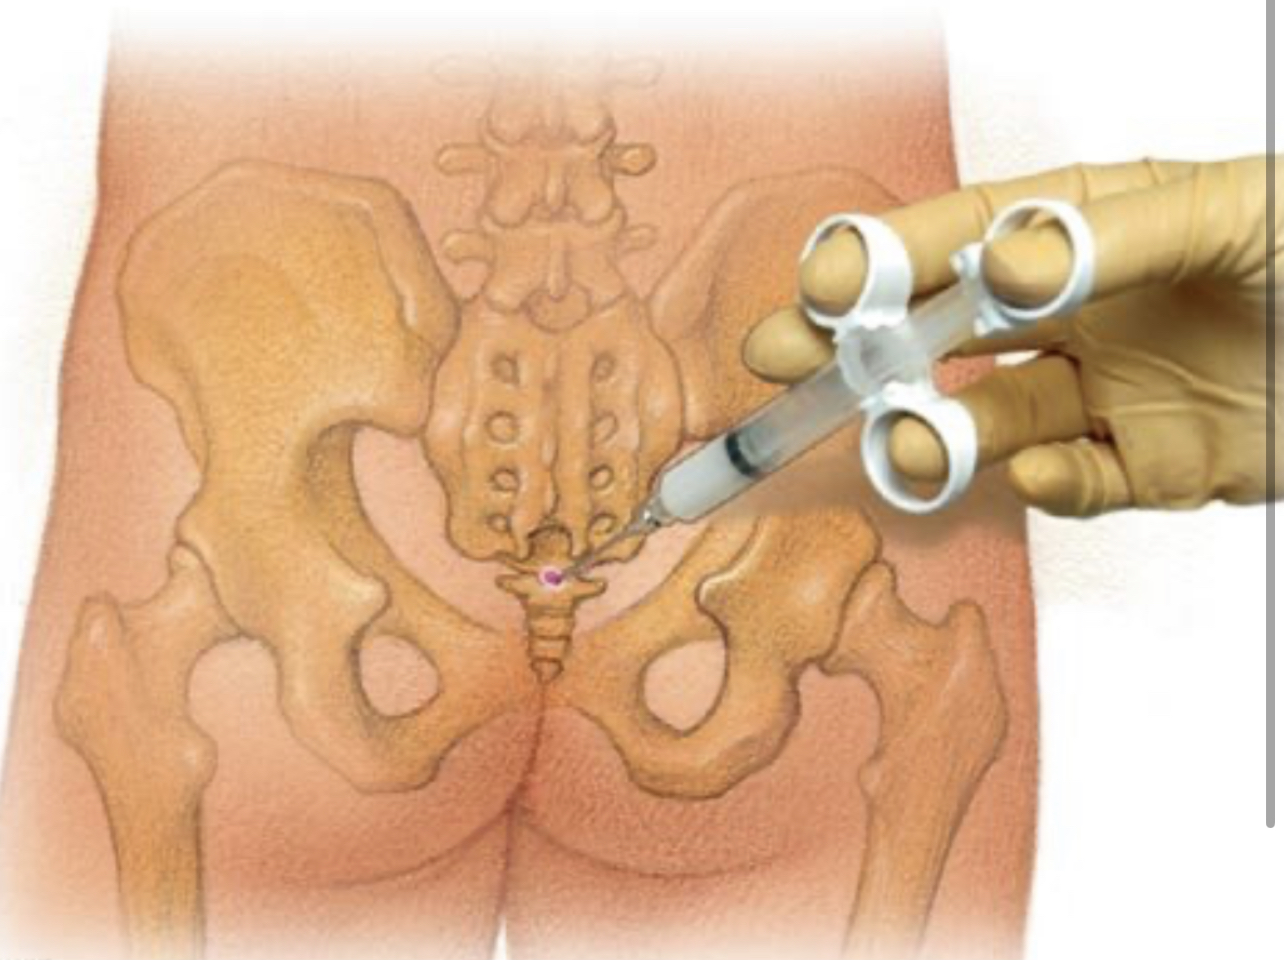 Sacrococcygeal joint and ligament Injection
                                                          